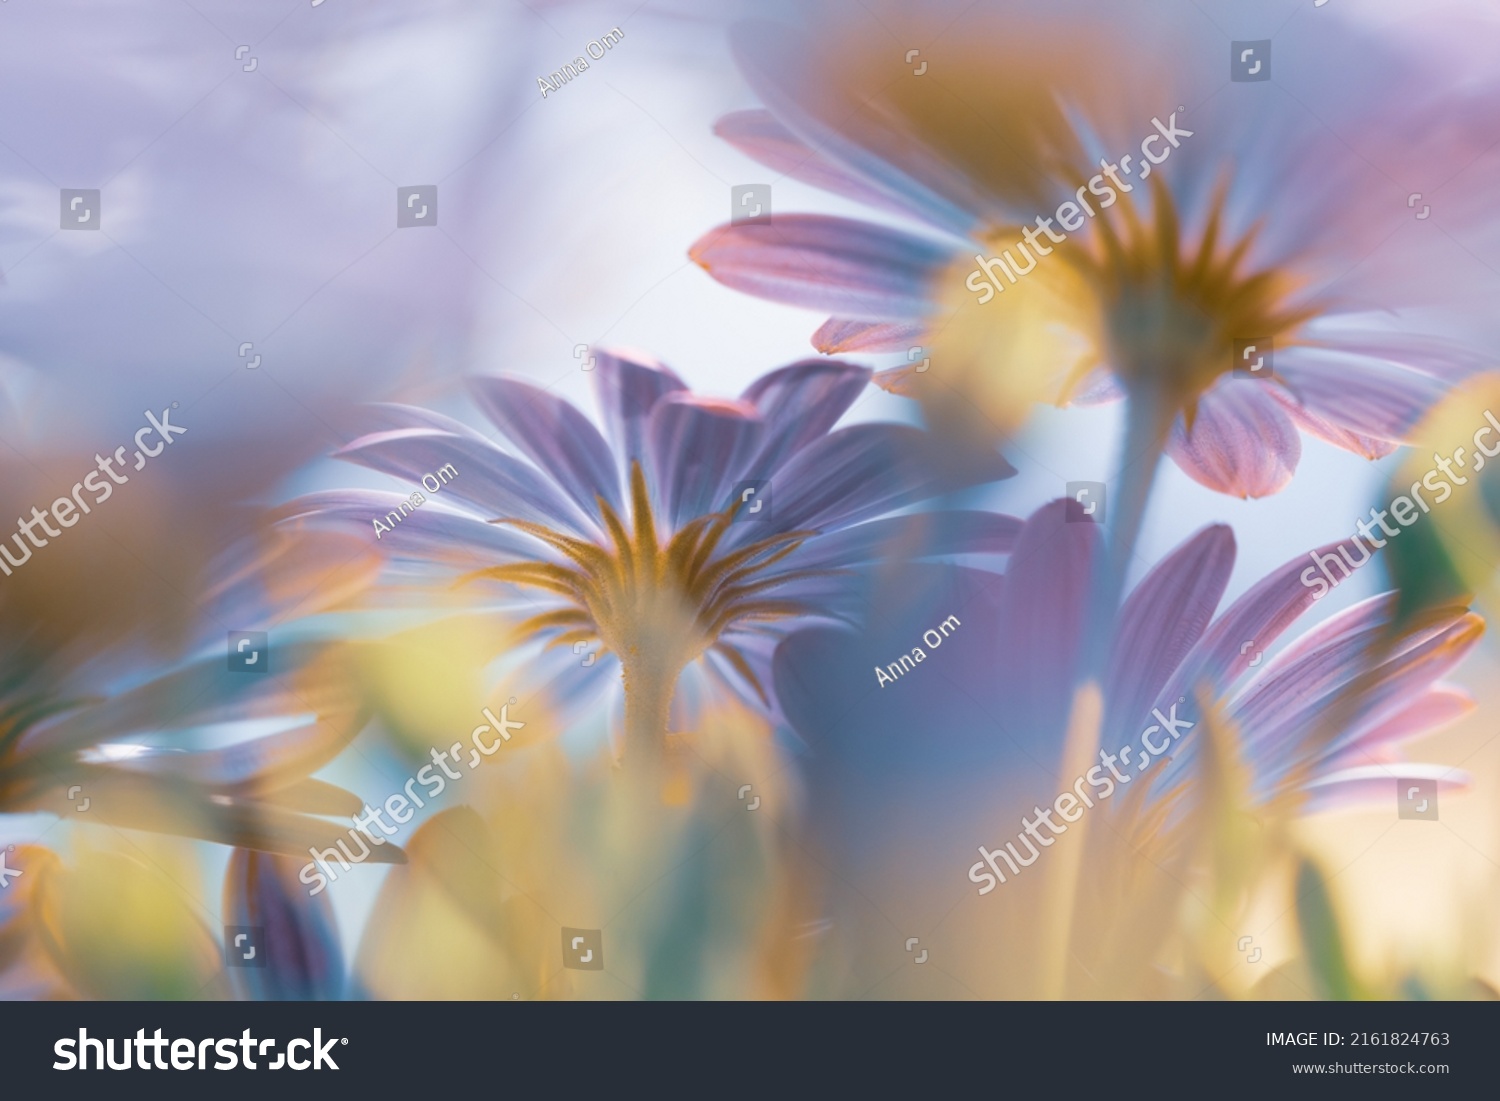 Beautiful Floral Background. Bottom View on a Gentle Purple Daisy Flowers in Bright Sunny Day. Fresh Chamomile Field. Beauty of Spring Nature. #2161824763